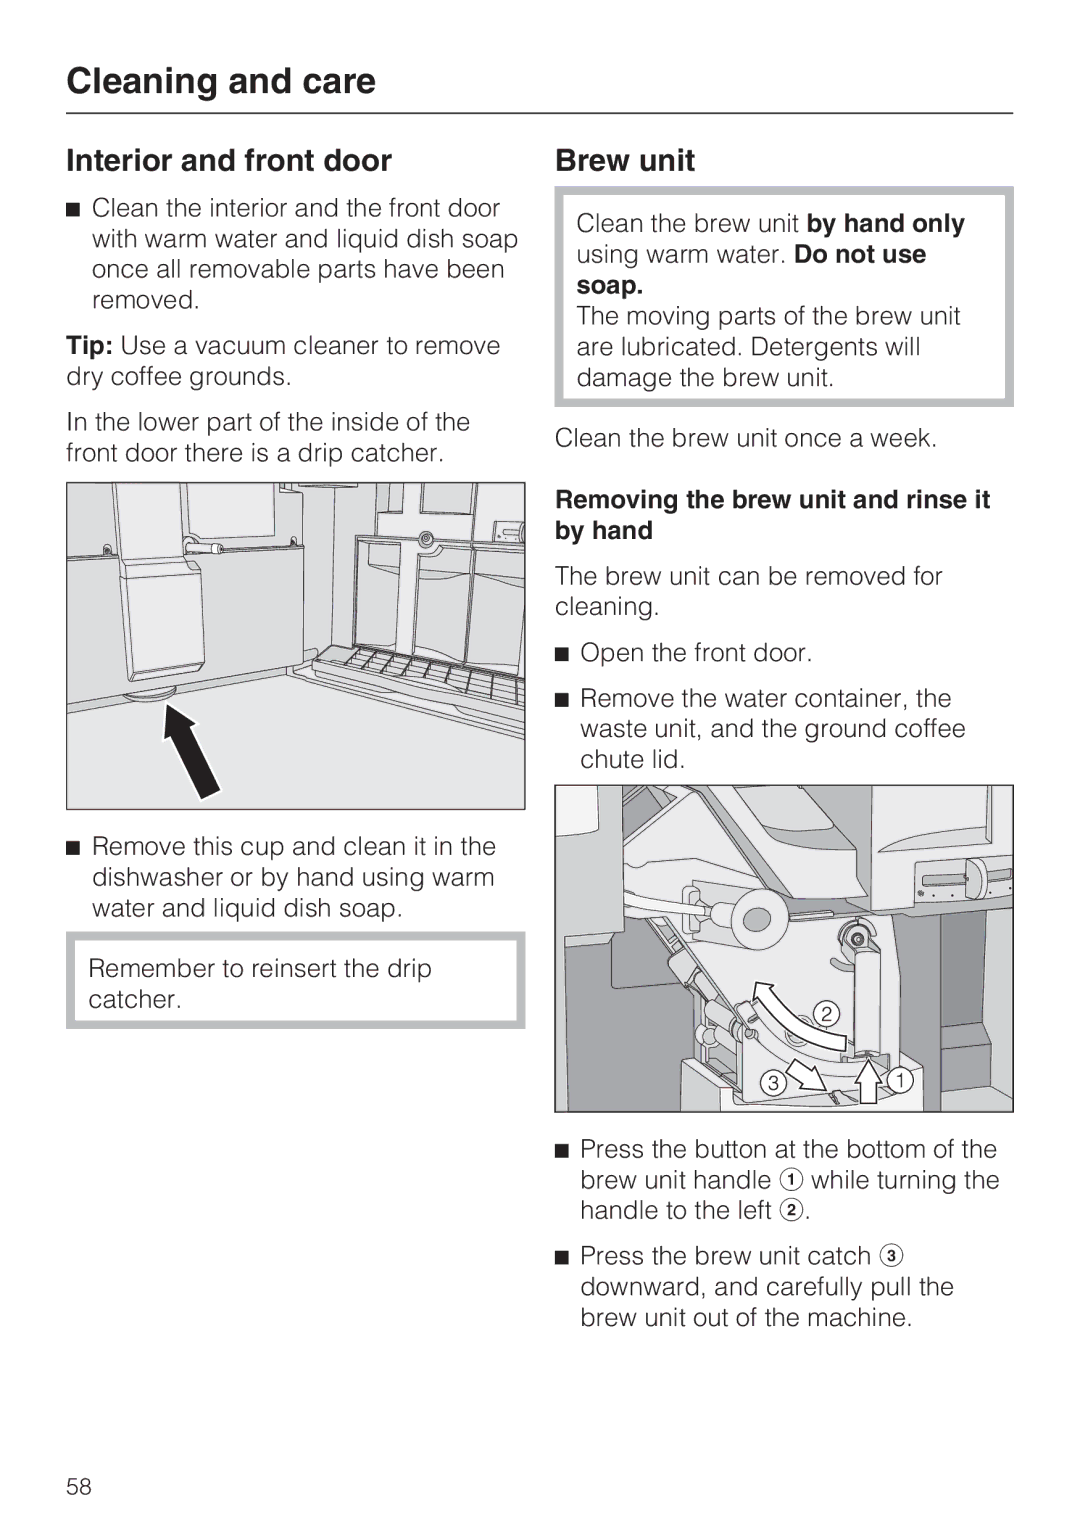 Miele 09 741 681 installation instructions Interior and front door, Removing the brew unit and rinse it by hand 